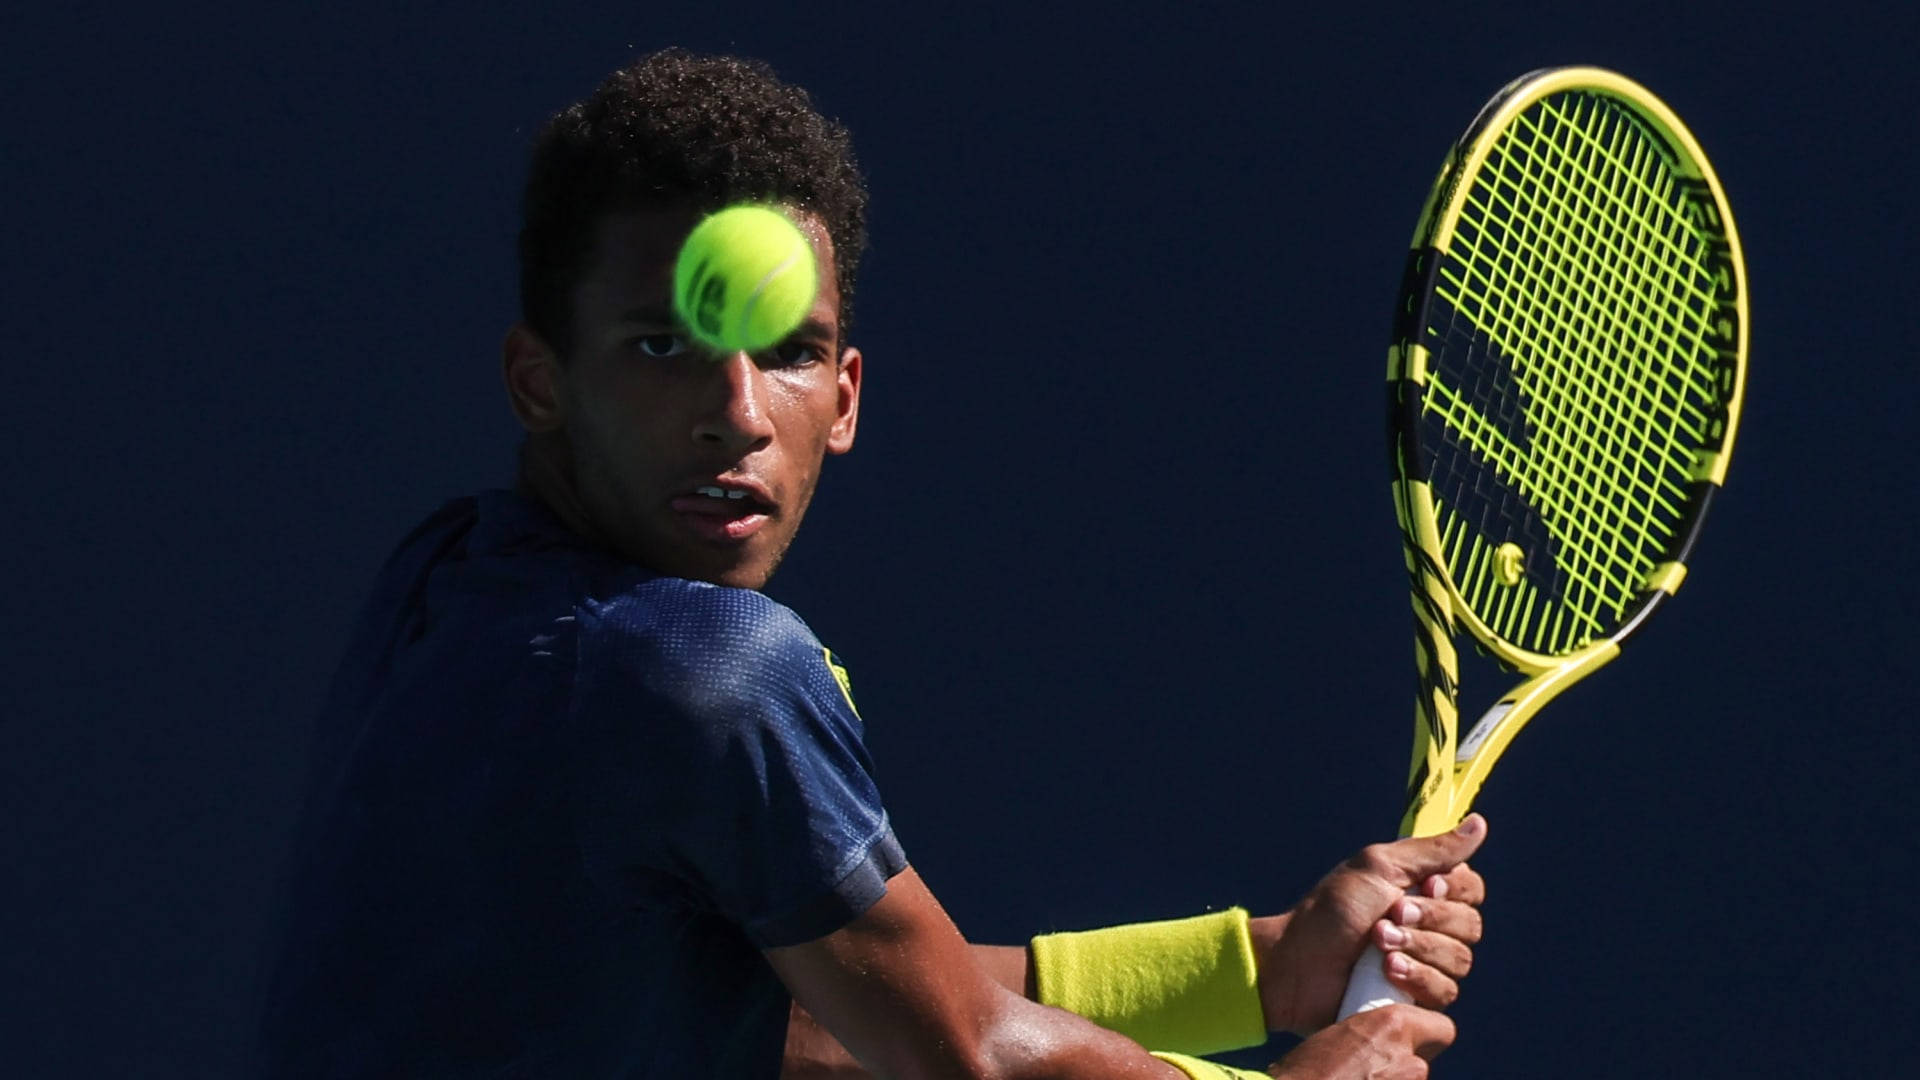 Felix Auger-Aliassime showcasing a steady, focused expression during a game. Wallpaper